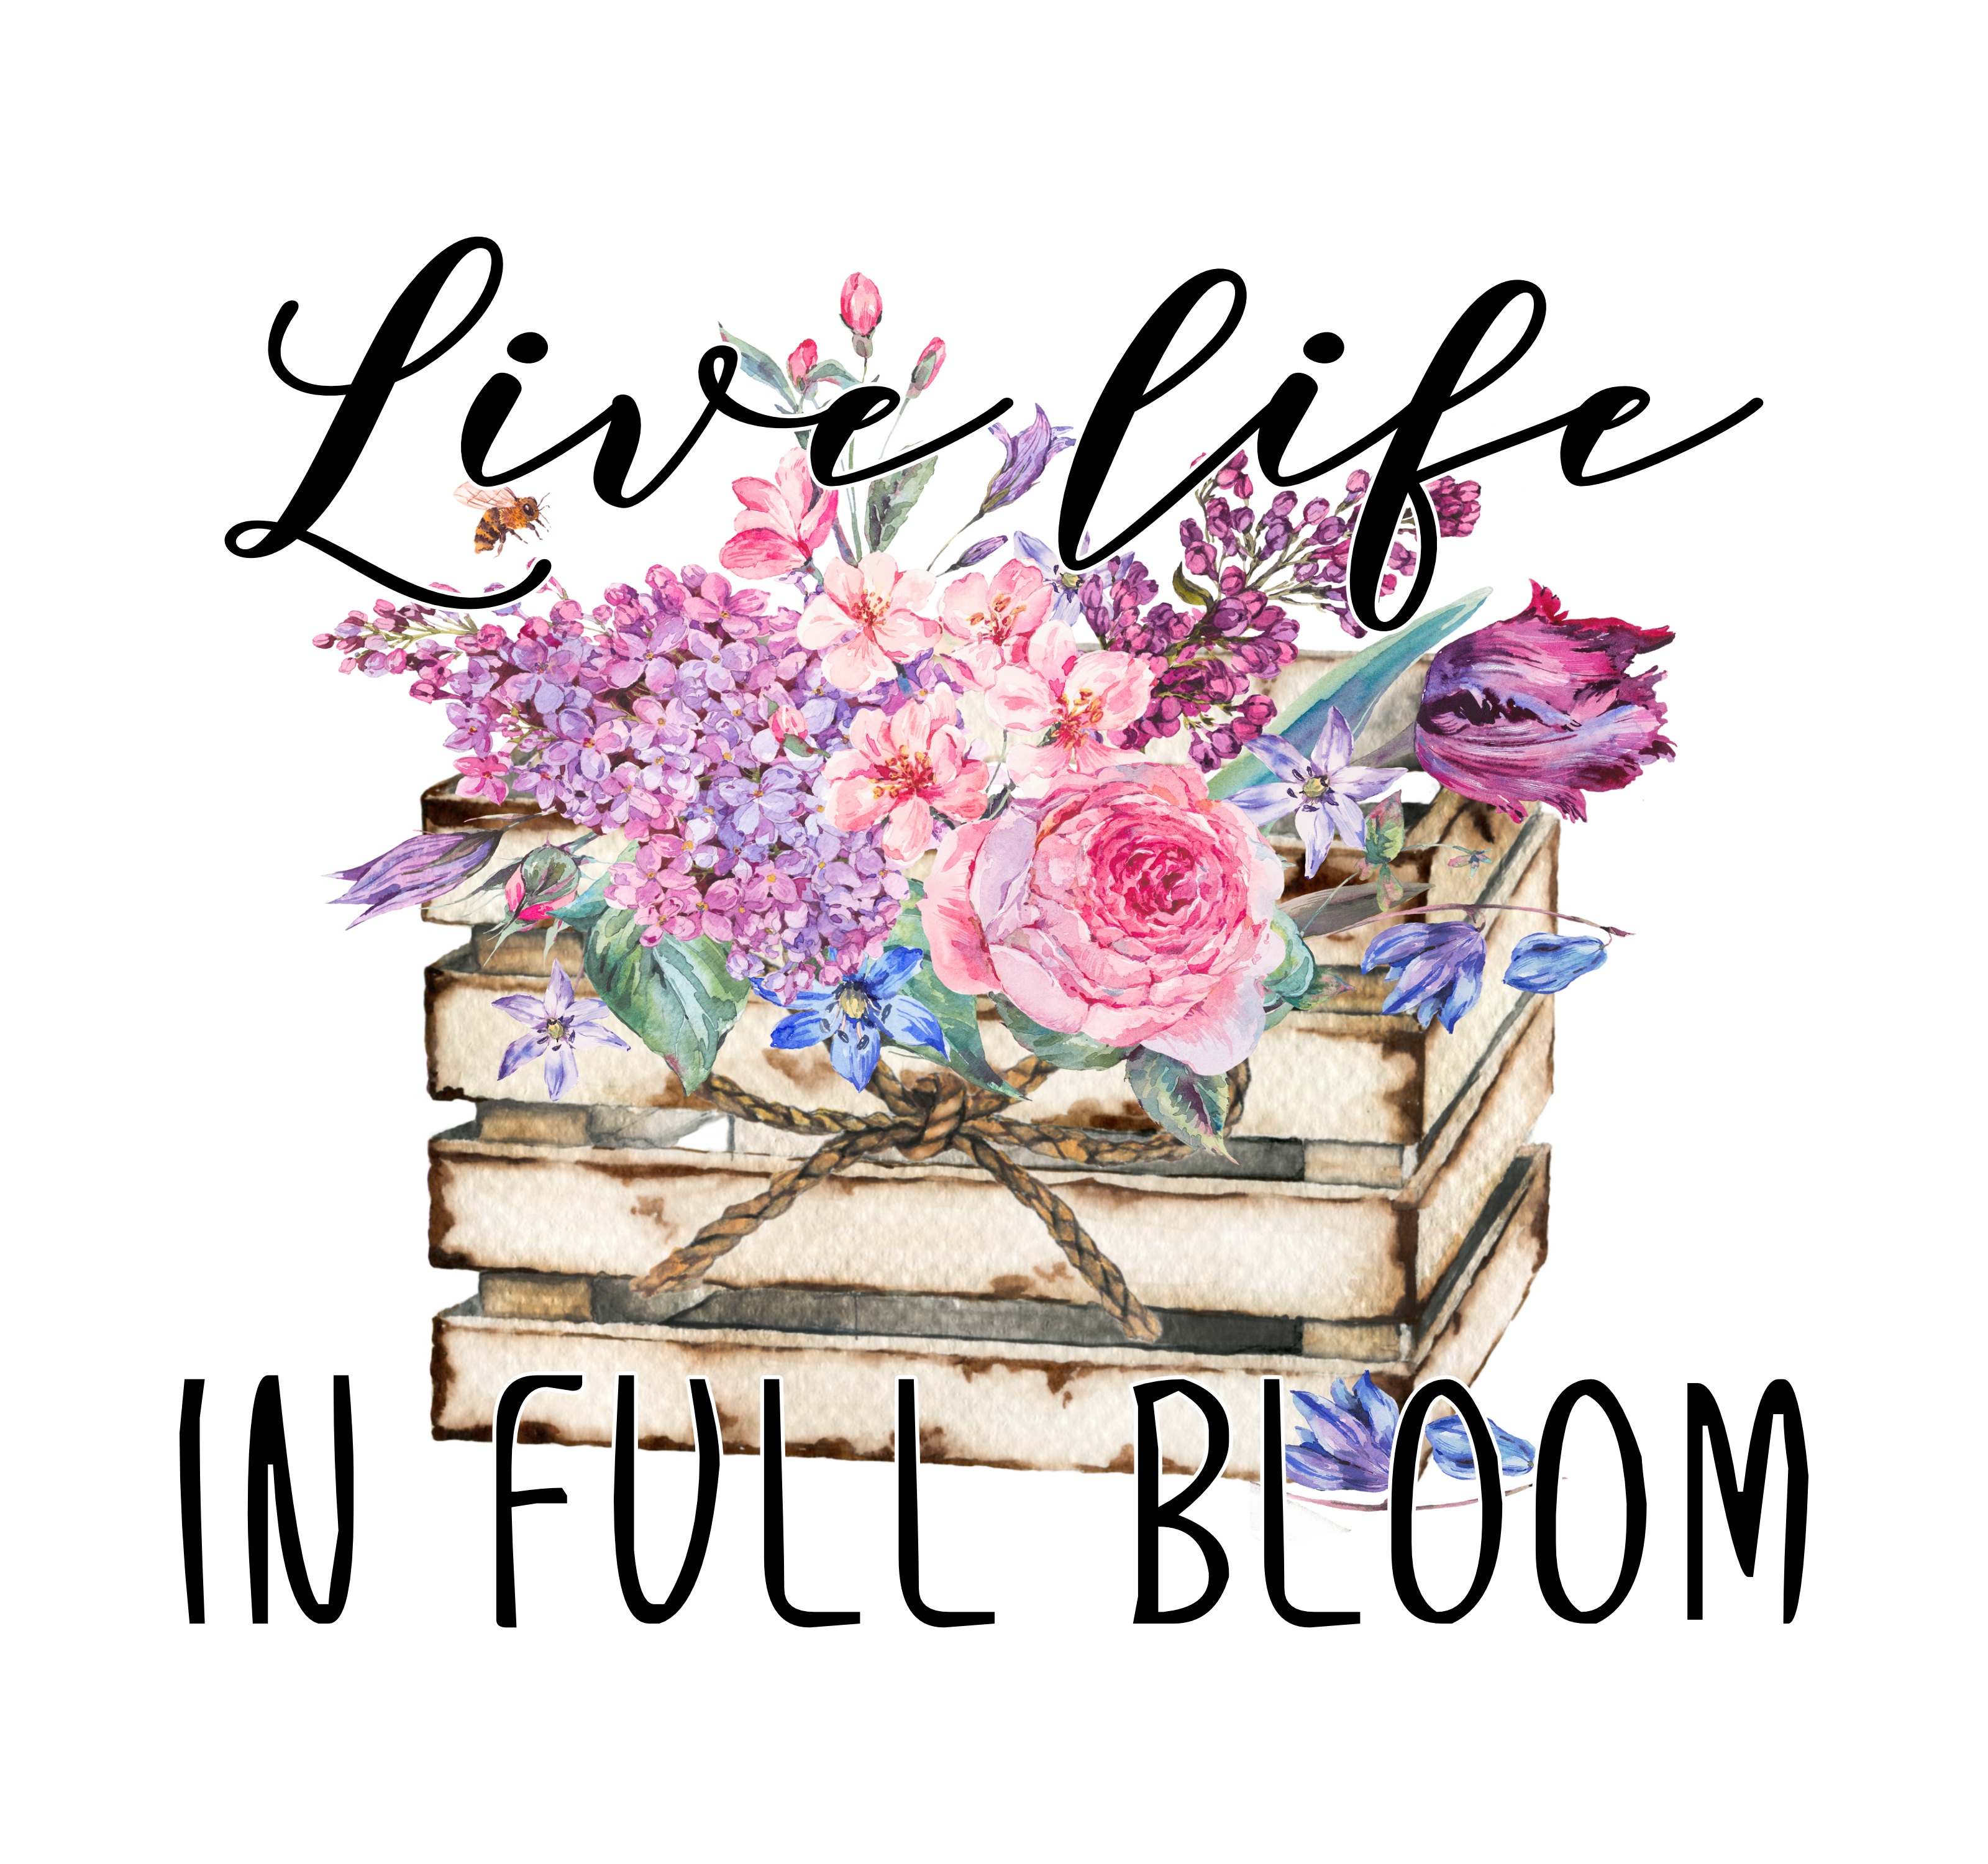 Live Life in Full Bloom - Crate of Flowers - Graphic Tee